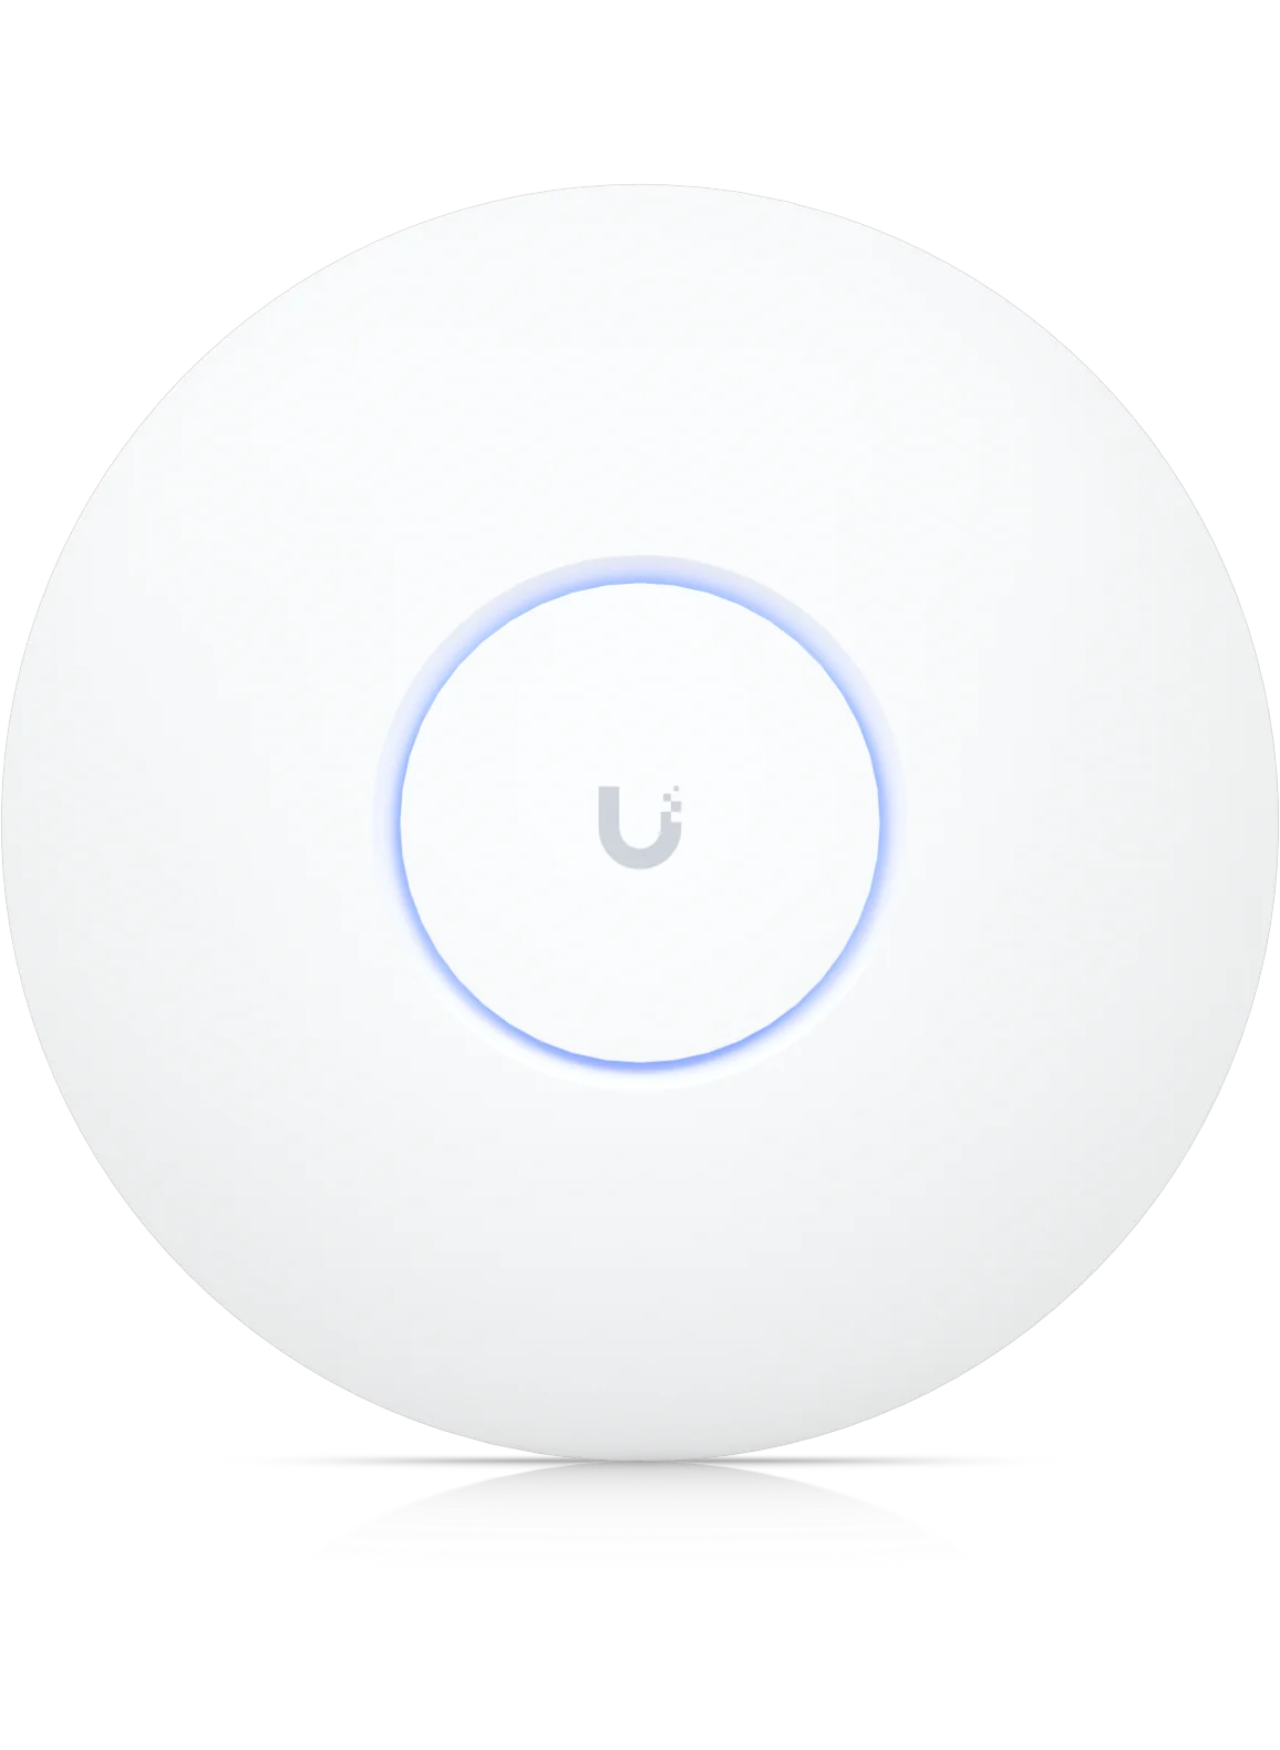 A picture of a white round wireless access point with a blue glowing ring in the middle.